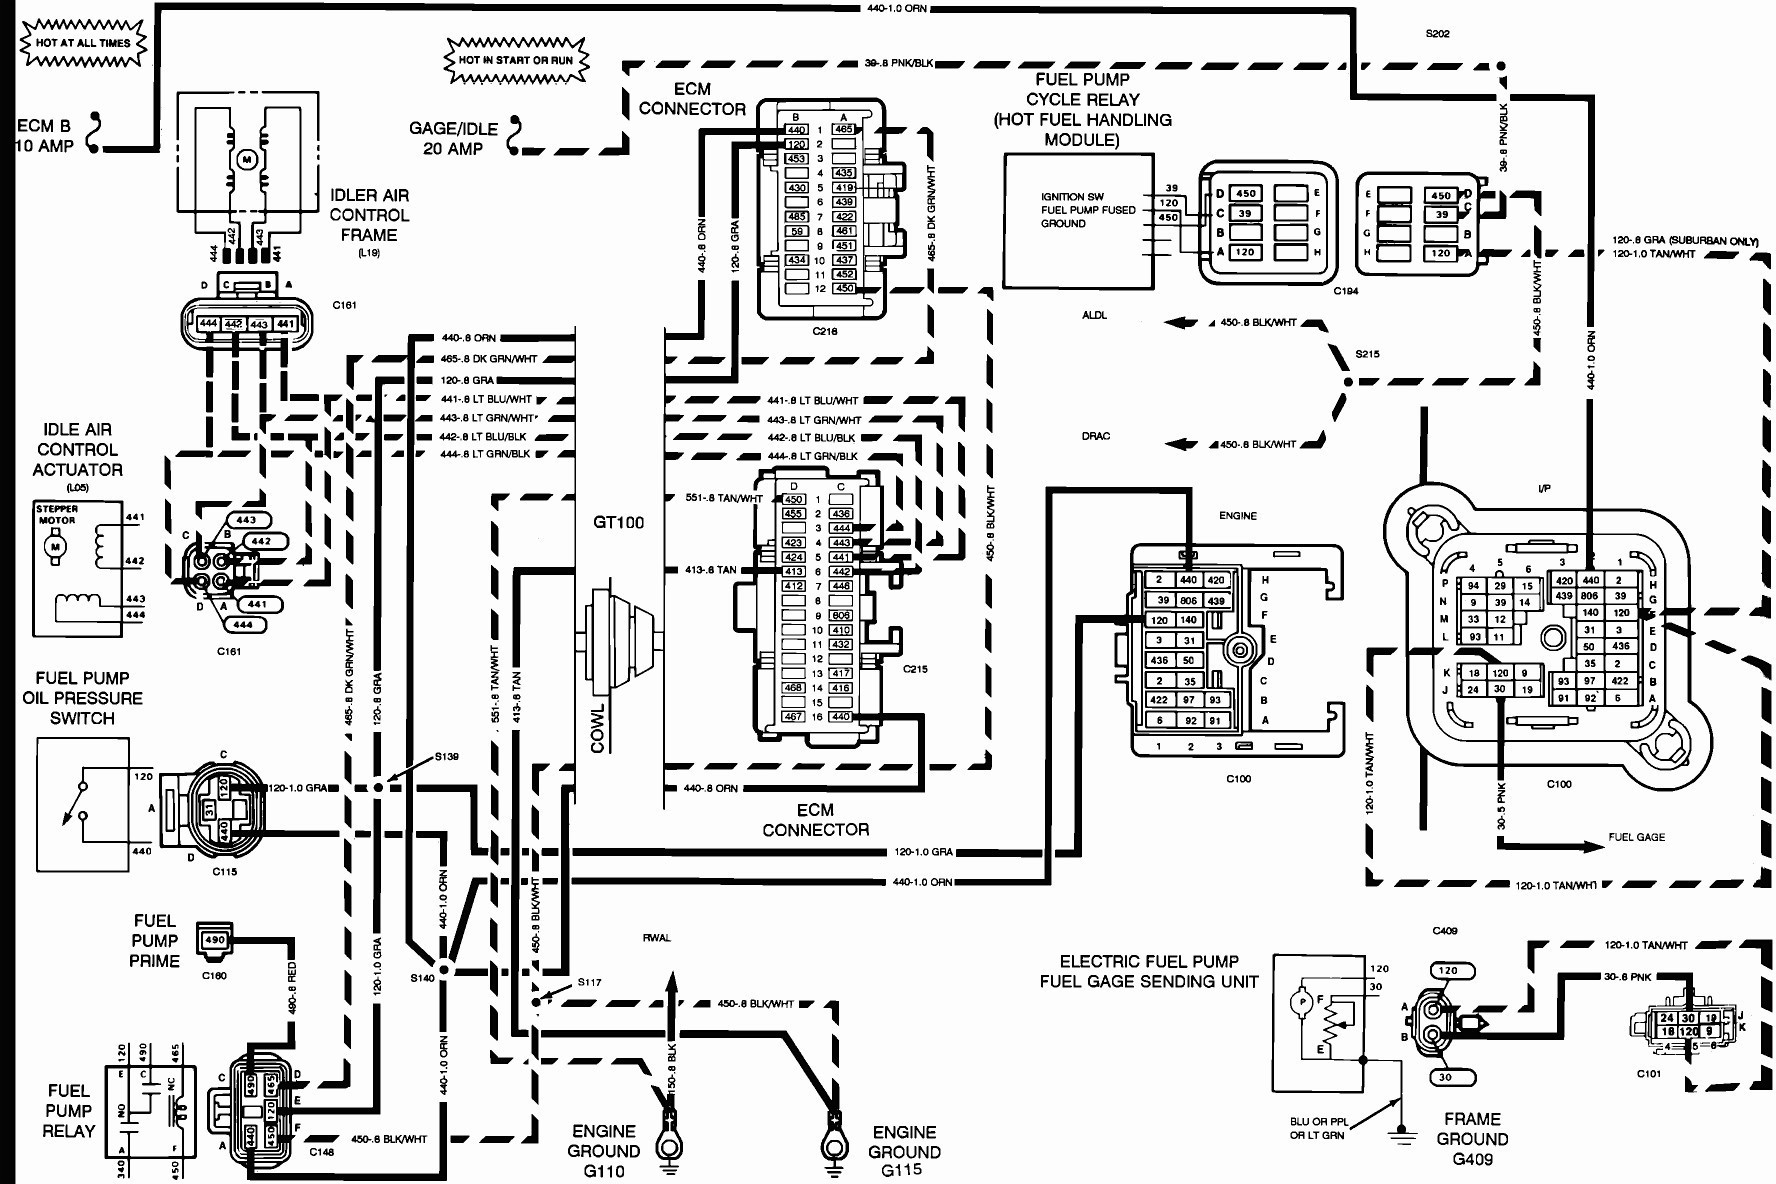 35 Freightliner Chassis Wiring Diagram - Wiring Diagram Database